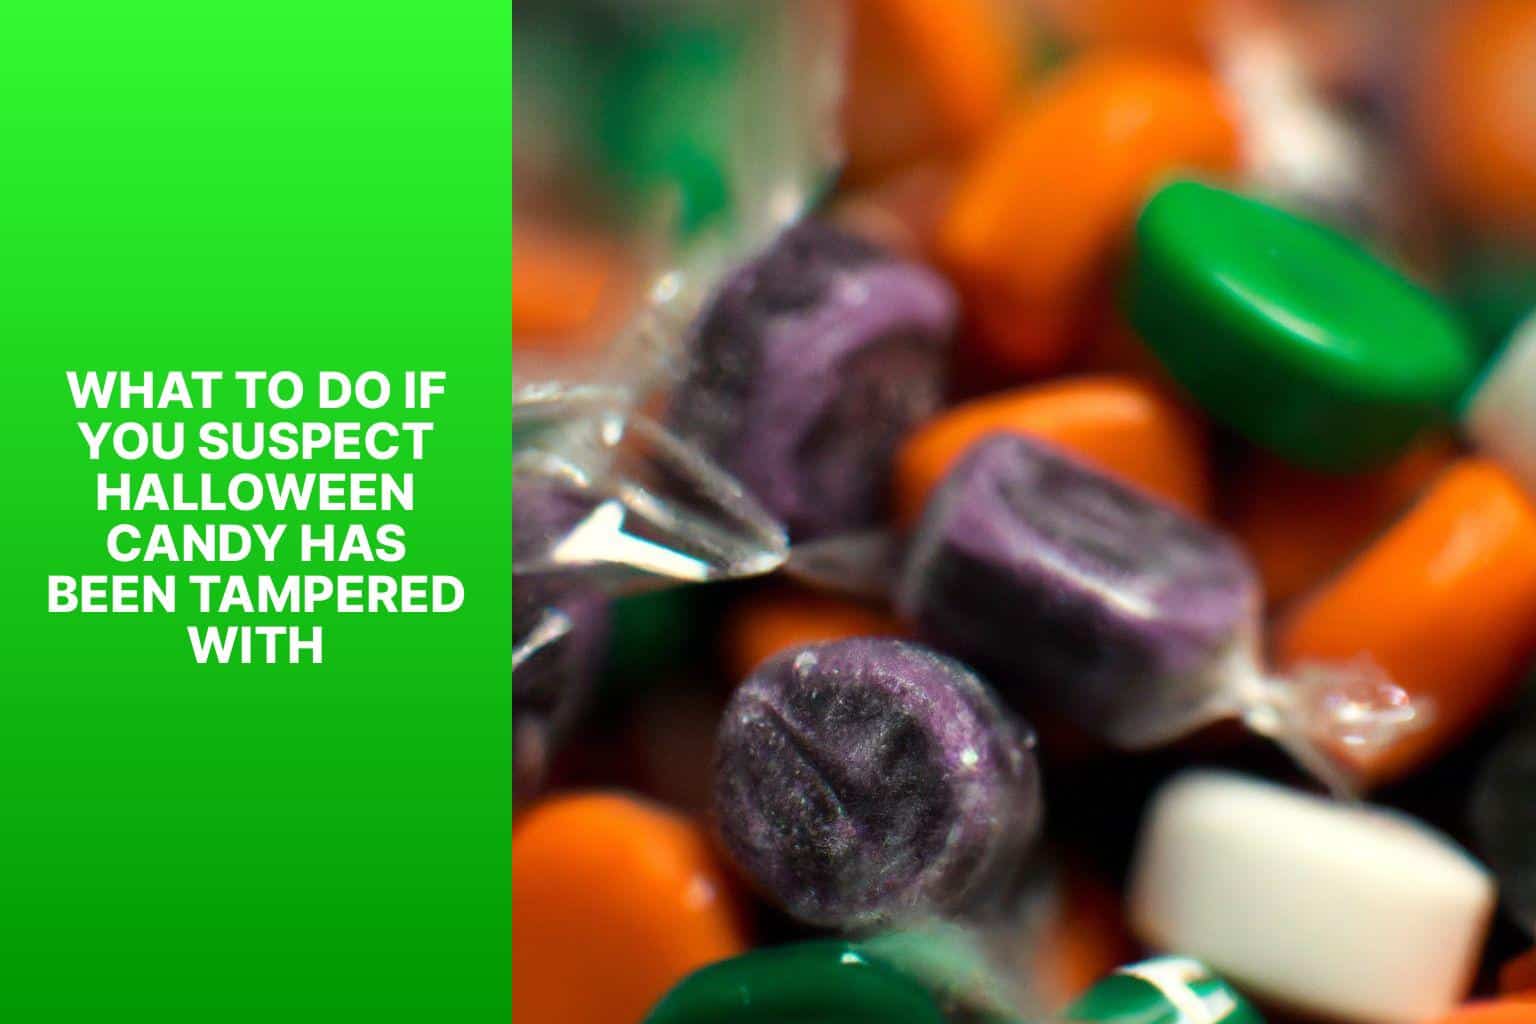 What to Do If You Suspect Halloween Candy Has Been Tampered With - how to tell if halloween candy has been tampered with 